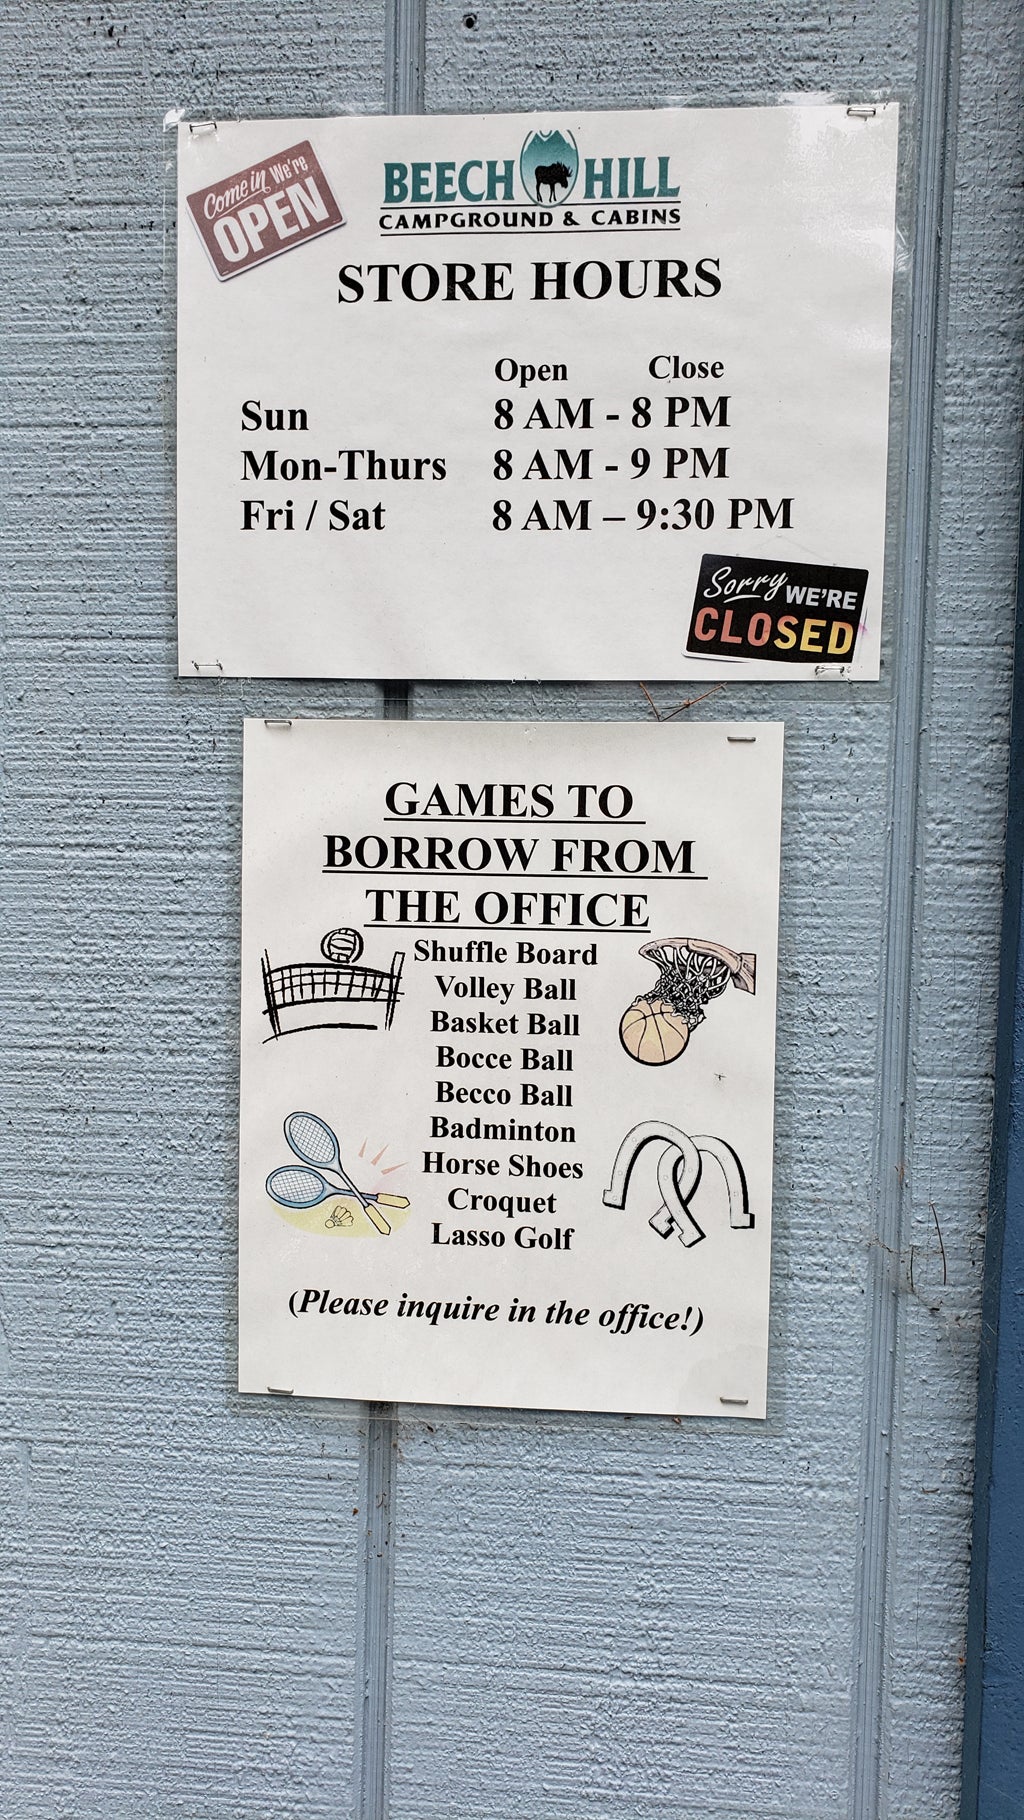 Store hours..and equipment you can borrow!